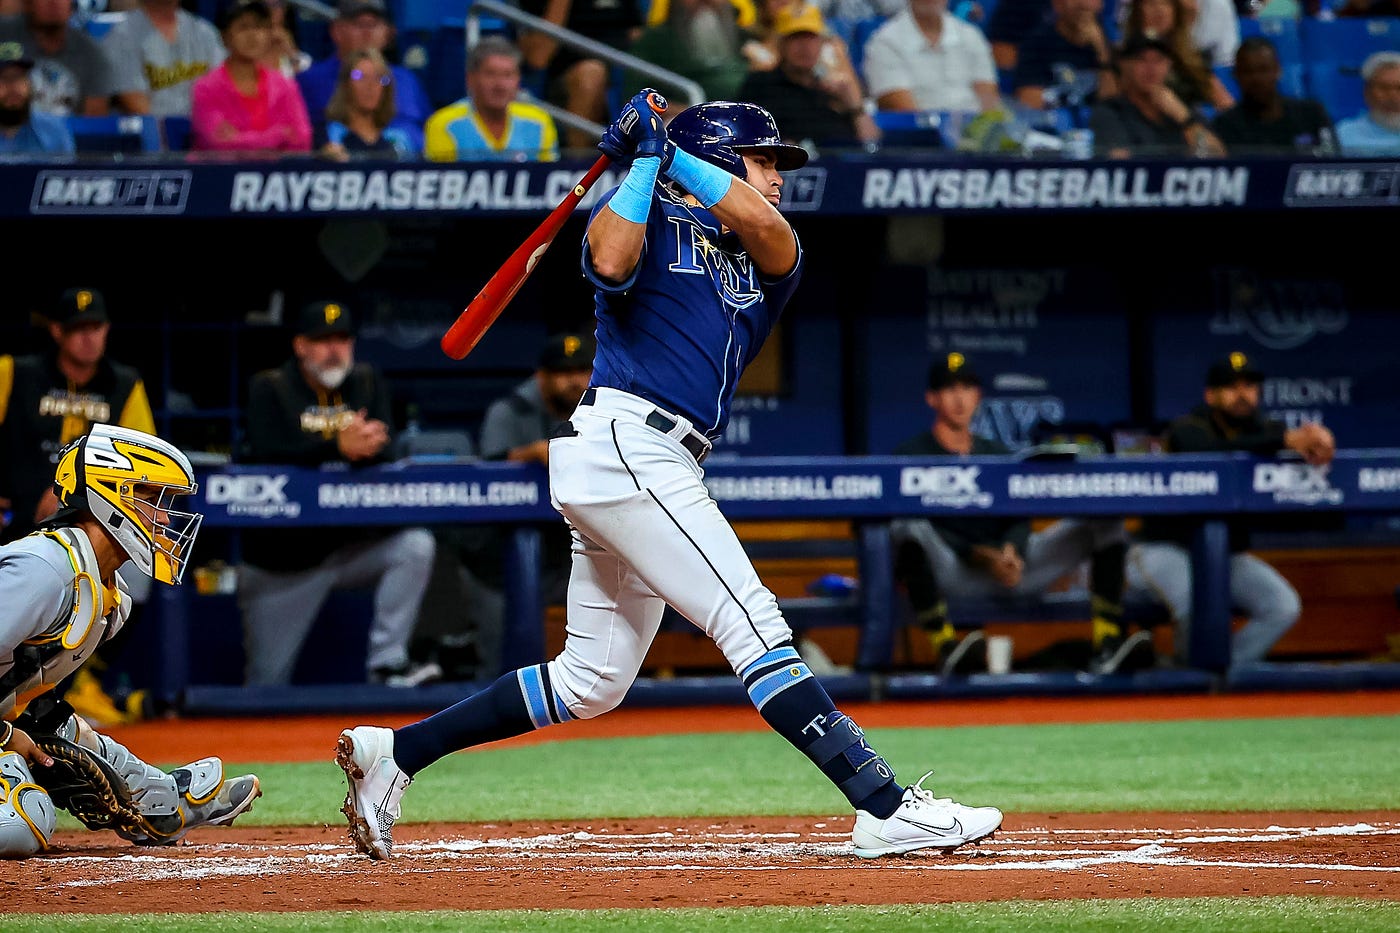 Rays Add Wisler, Aranda as Rosters Expand, by RaysRadio